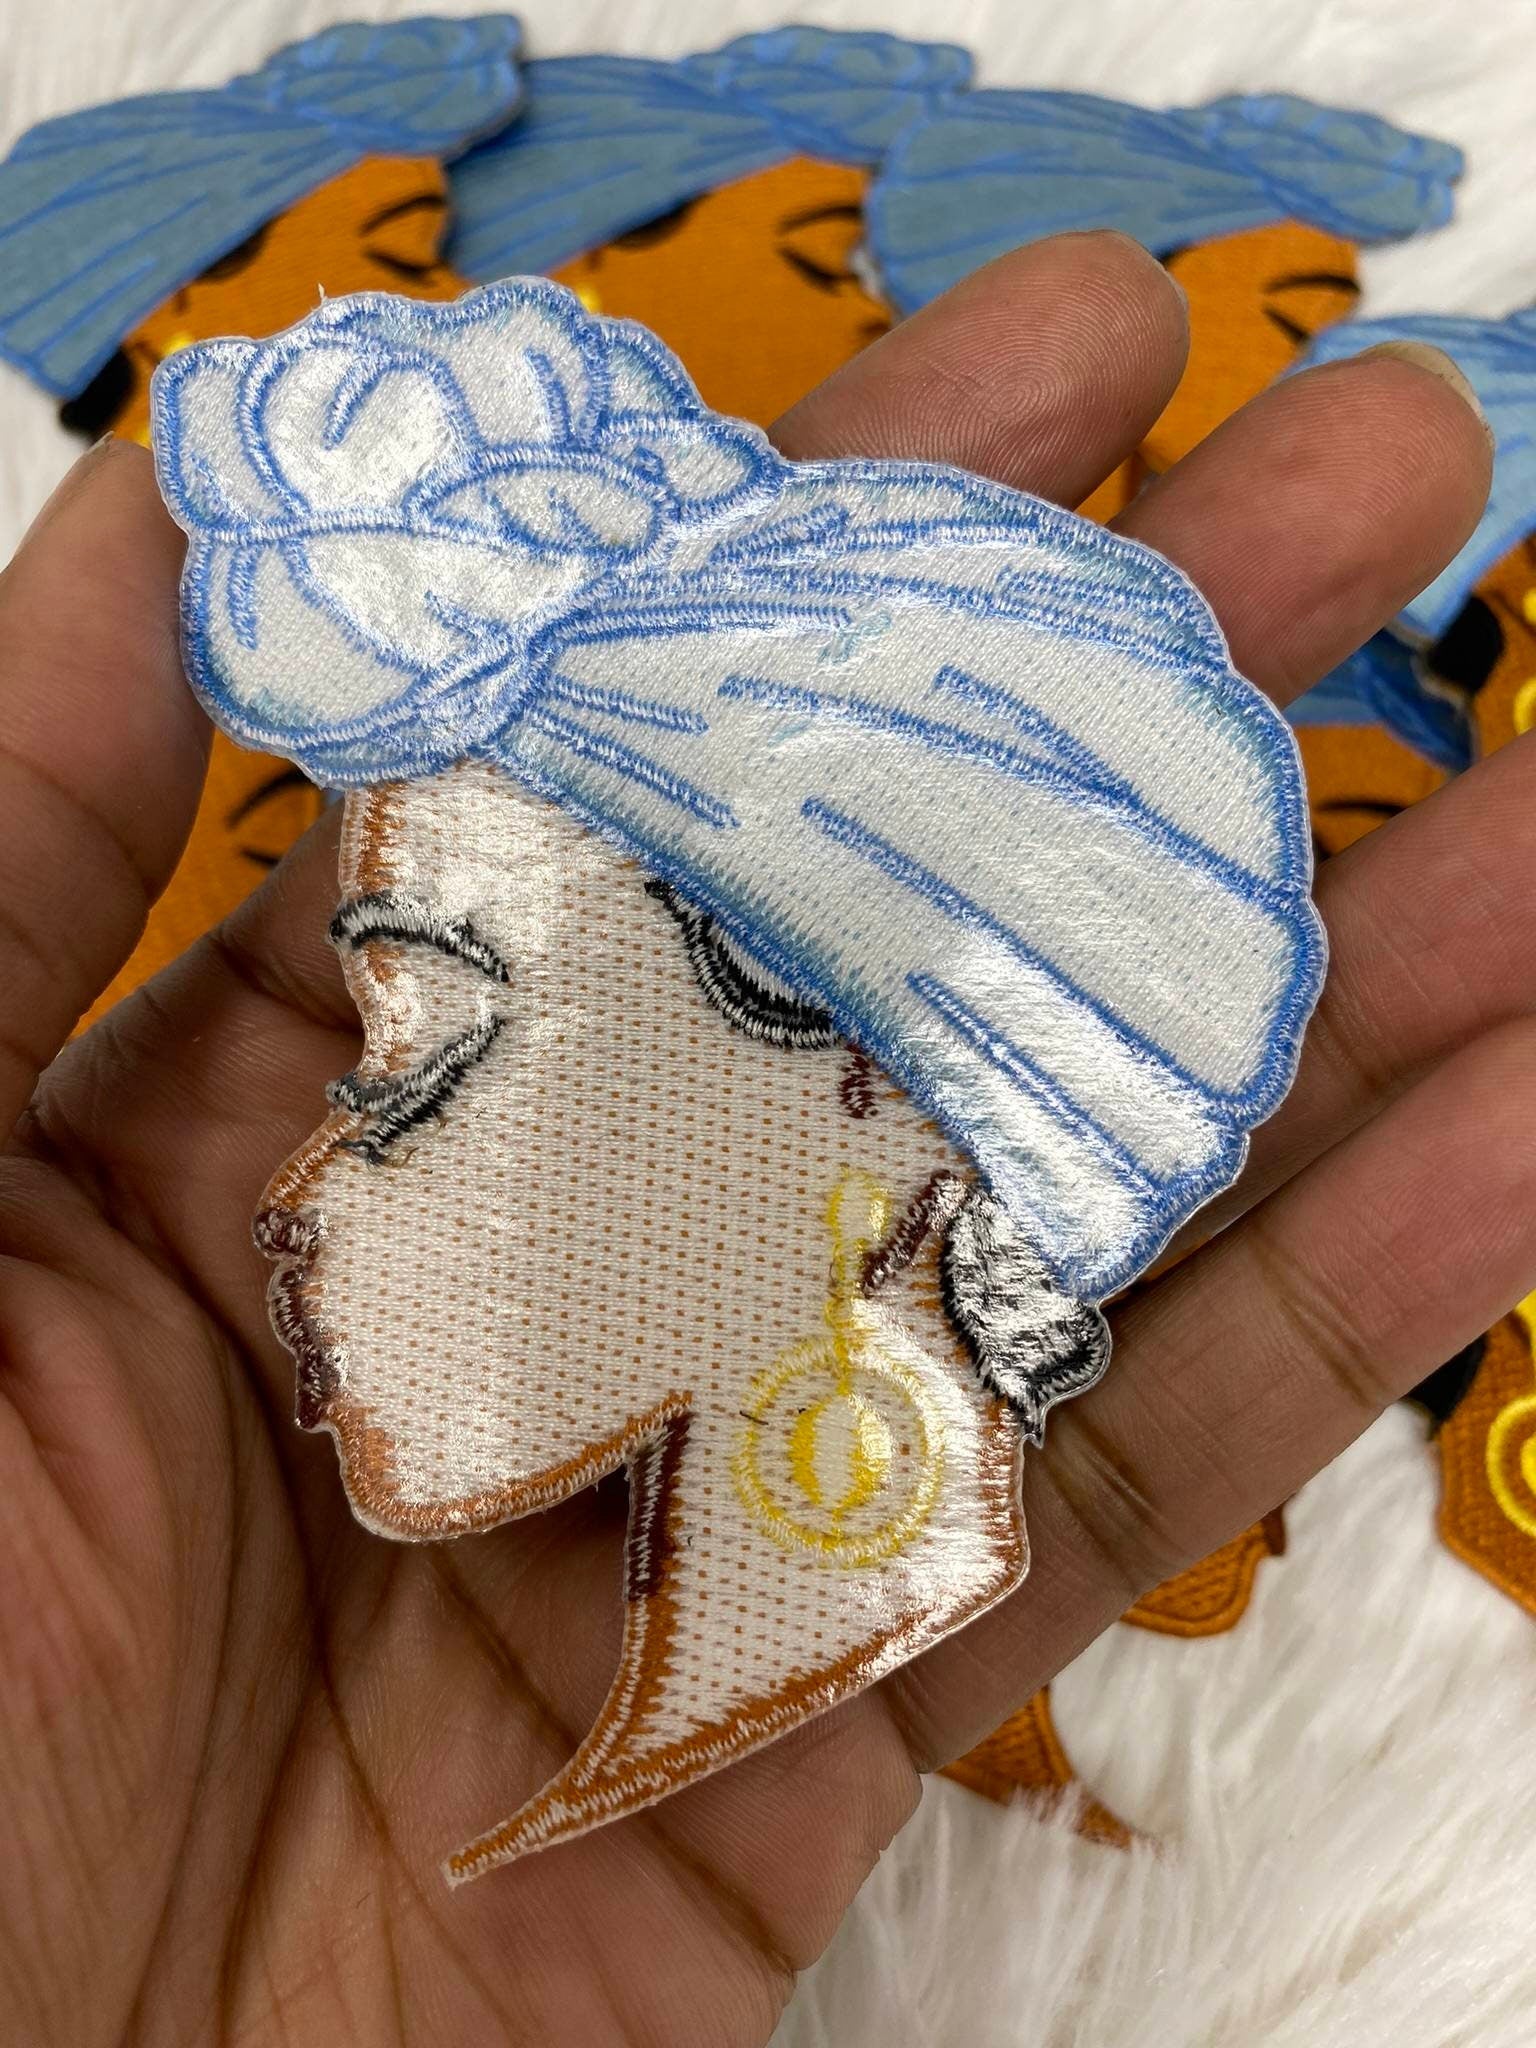 NEW, Meditating Cutie Embroidered Iron-on Patch, with "Aqua Blue Head Wrap" Size 4", Small Patch for Hats, Camos, Crocs, and Shoes